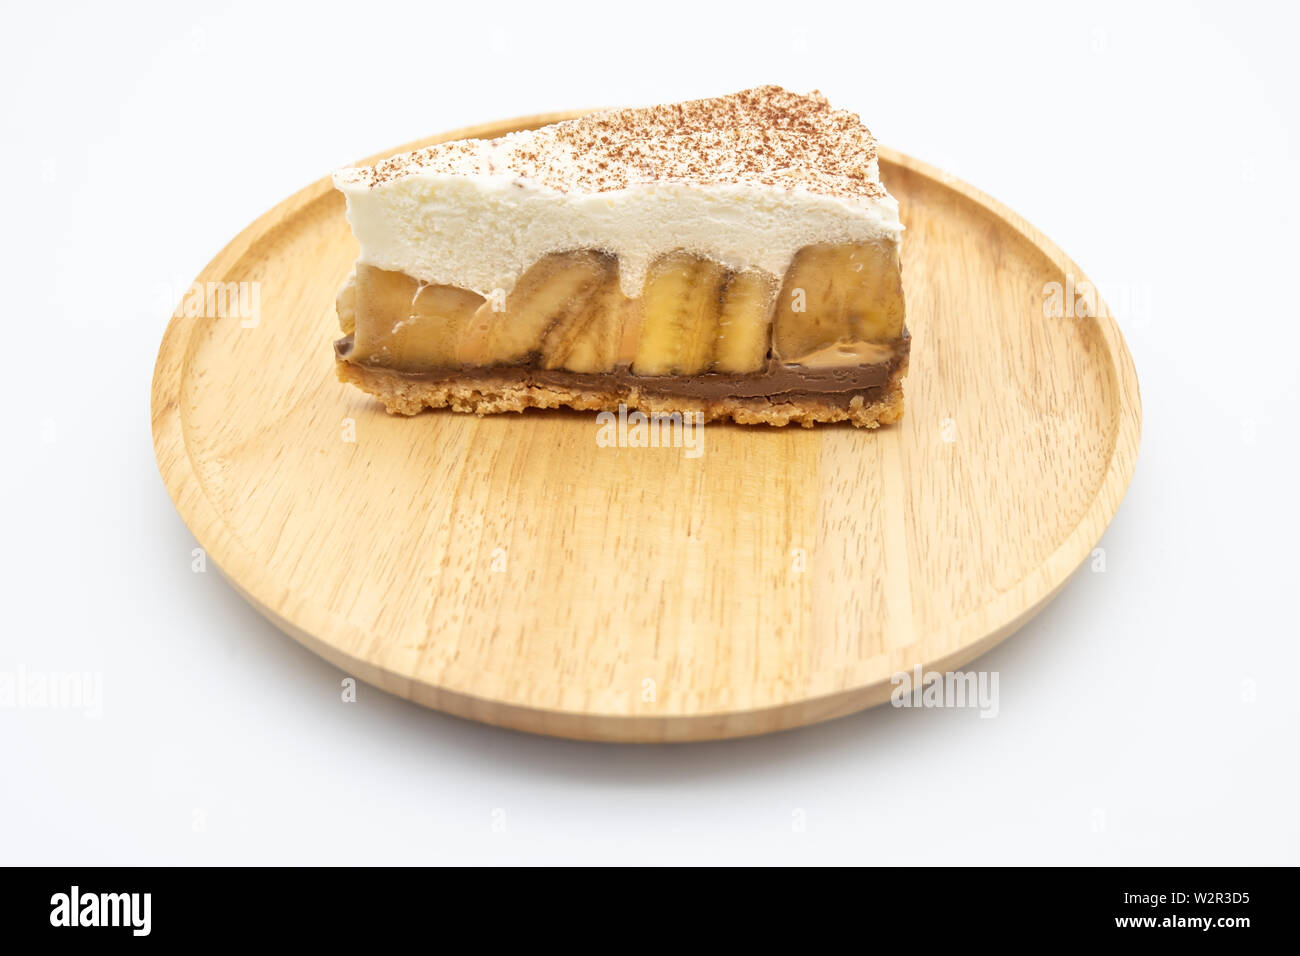 Banoffee Pie, whipped cream and banana on the wooden plate isolate ...